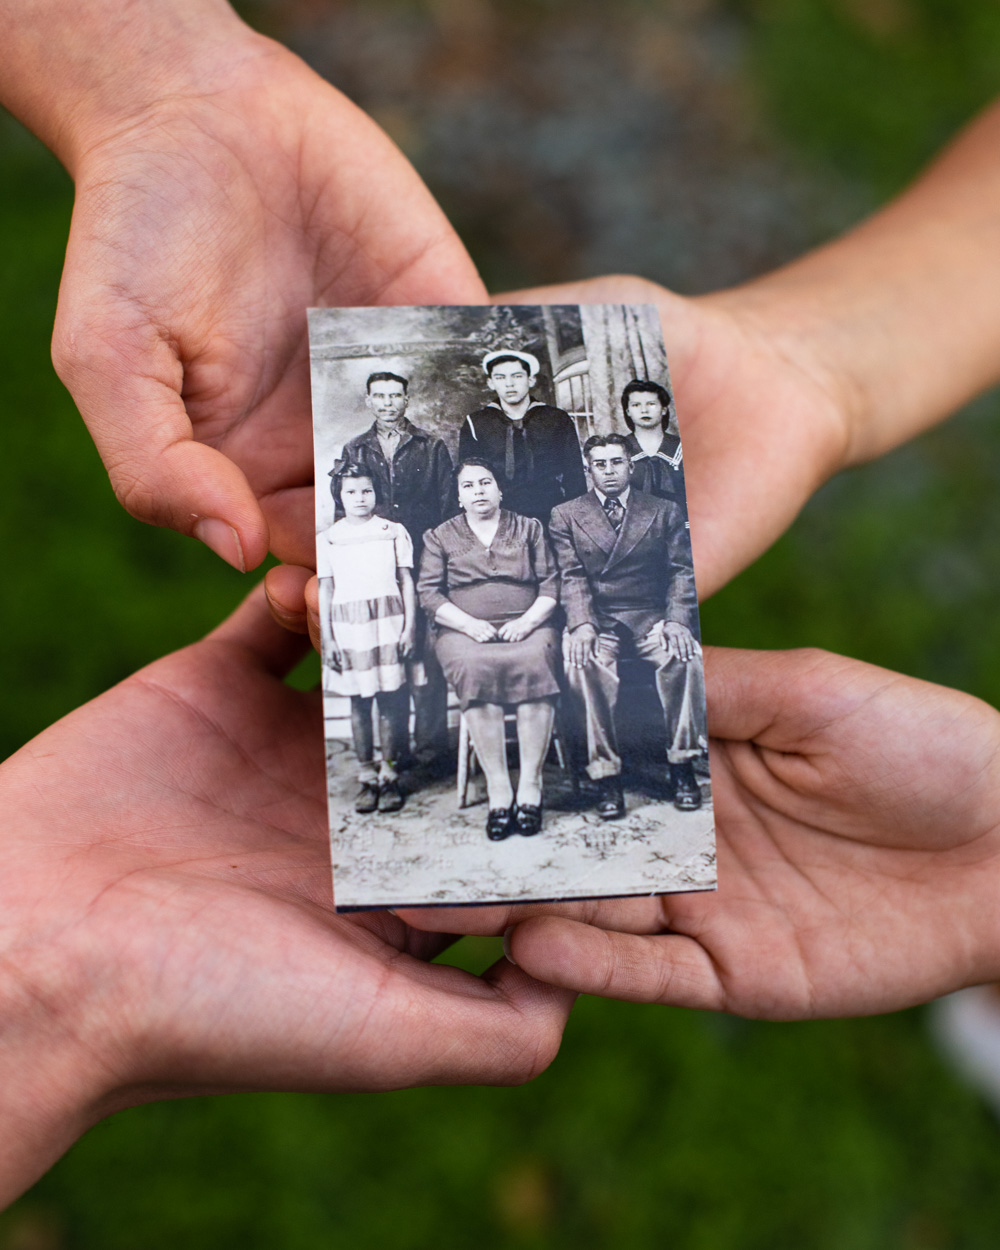 Four hands holding a black and white photo of five people